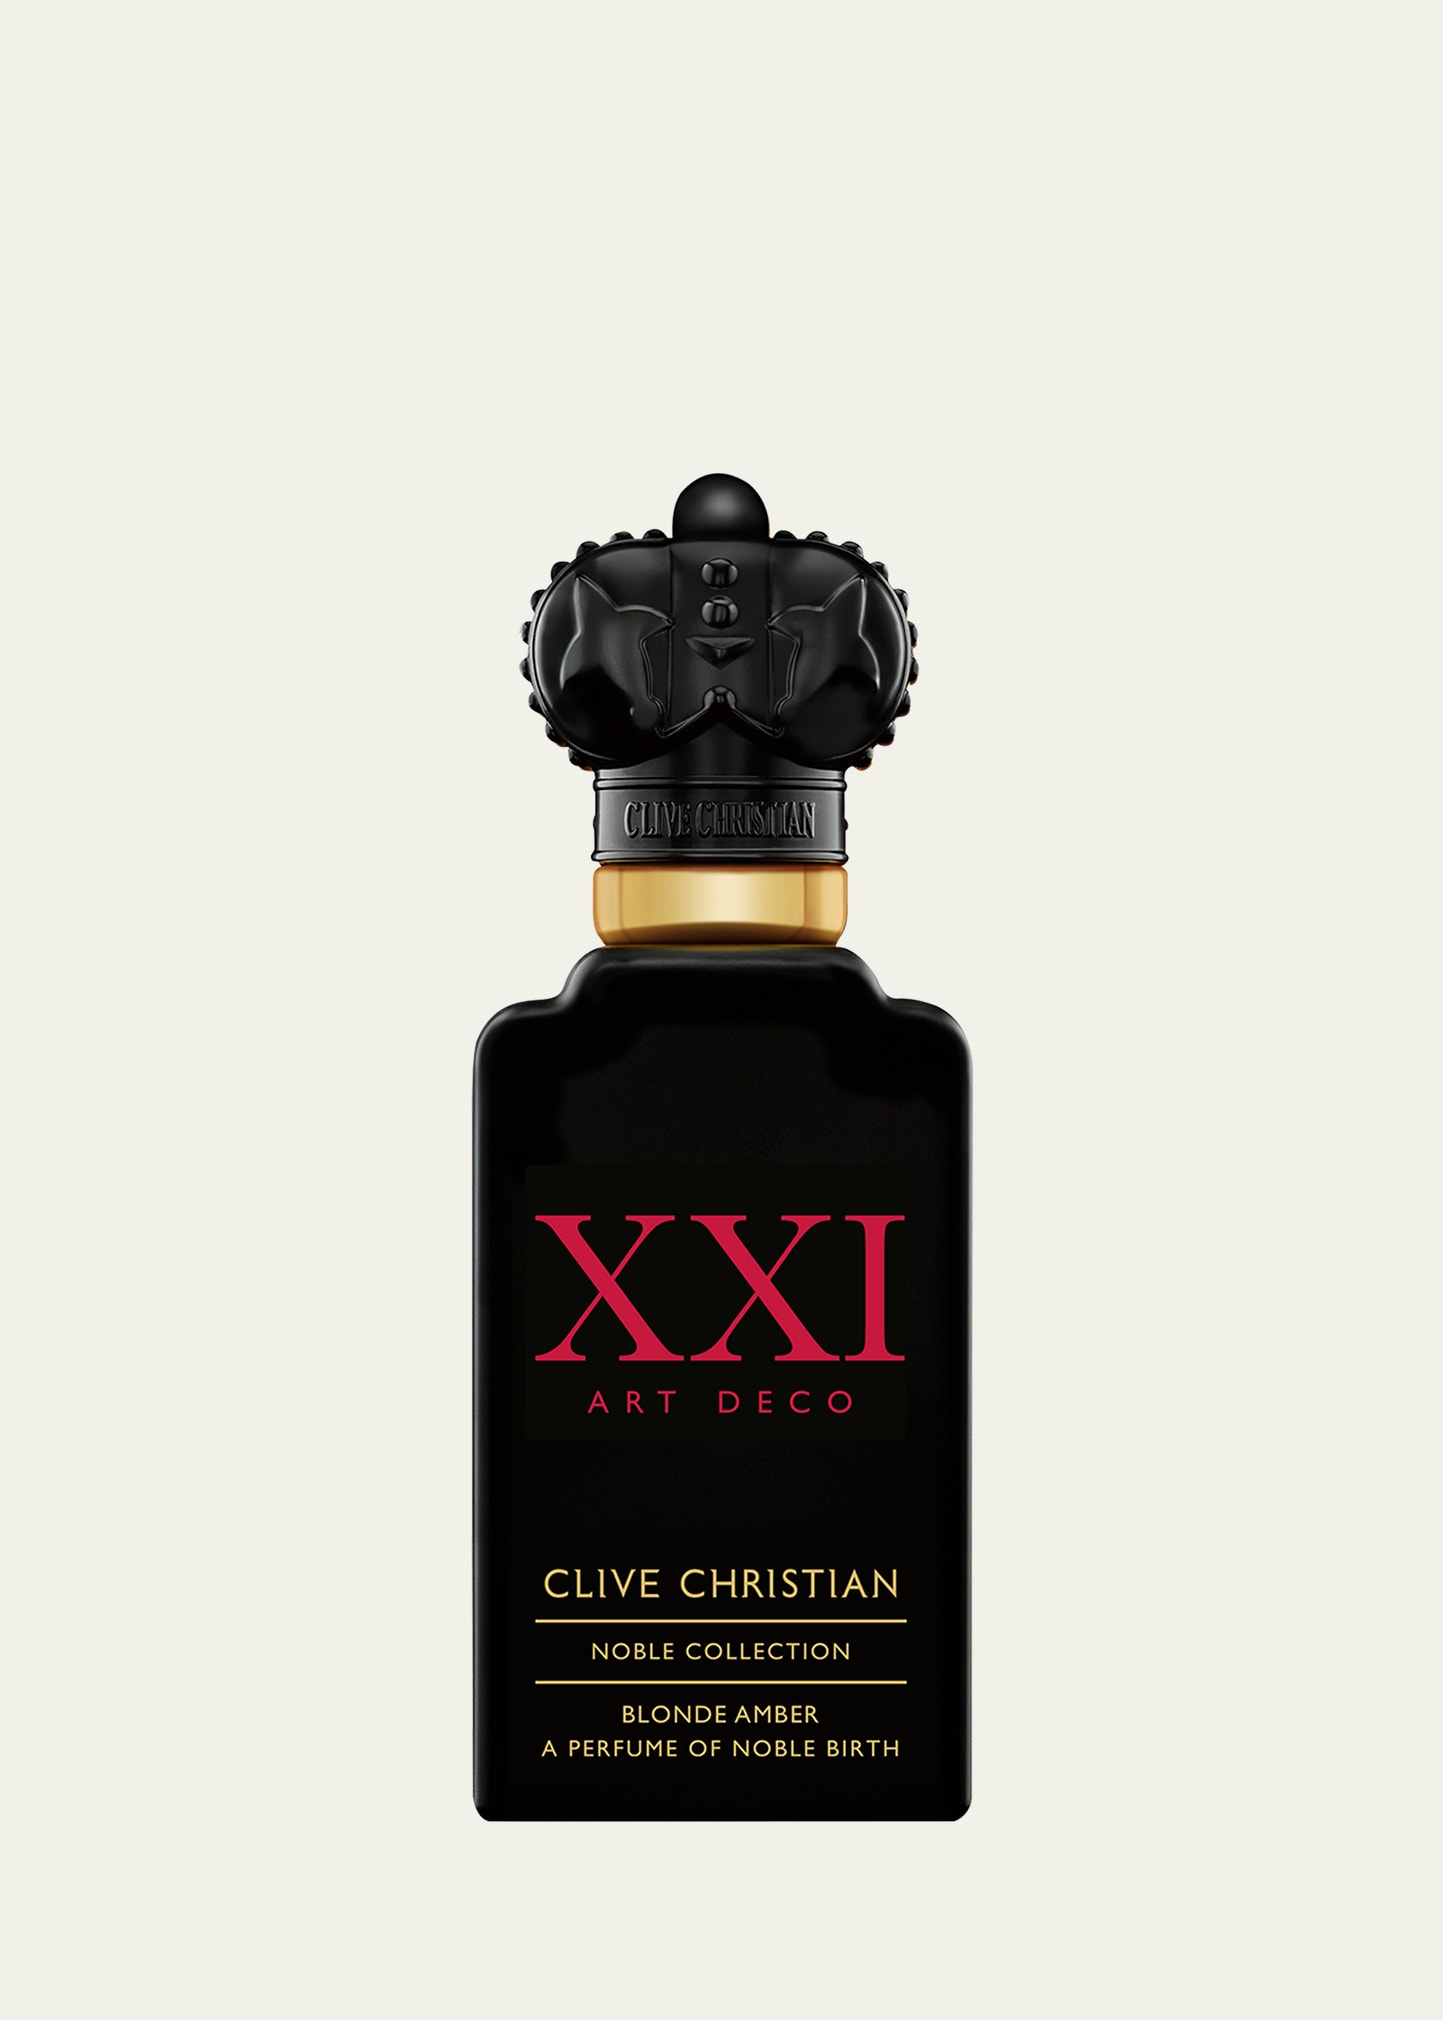 Clive Christian Noble Collection XXI Art Deco Blonde Amber Perfume, 1.7 oz. | Bergdorf Goodman